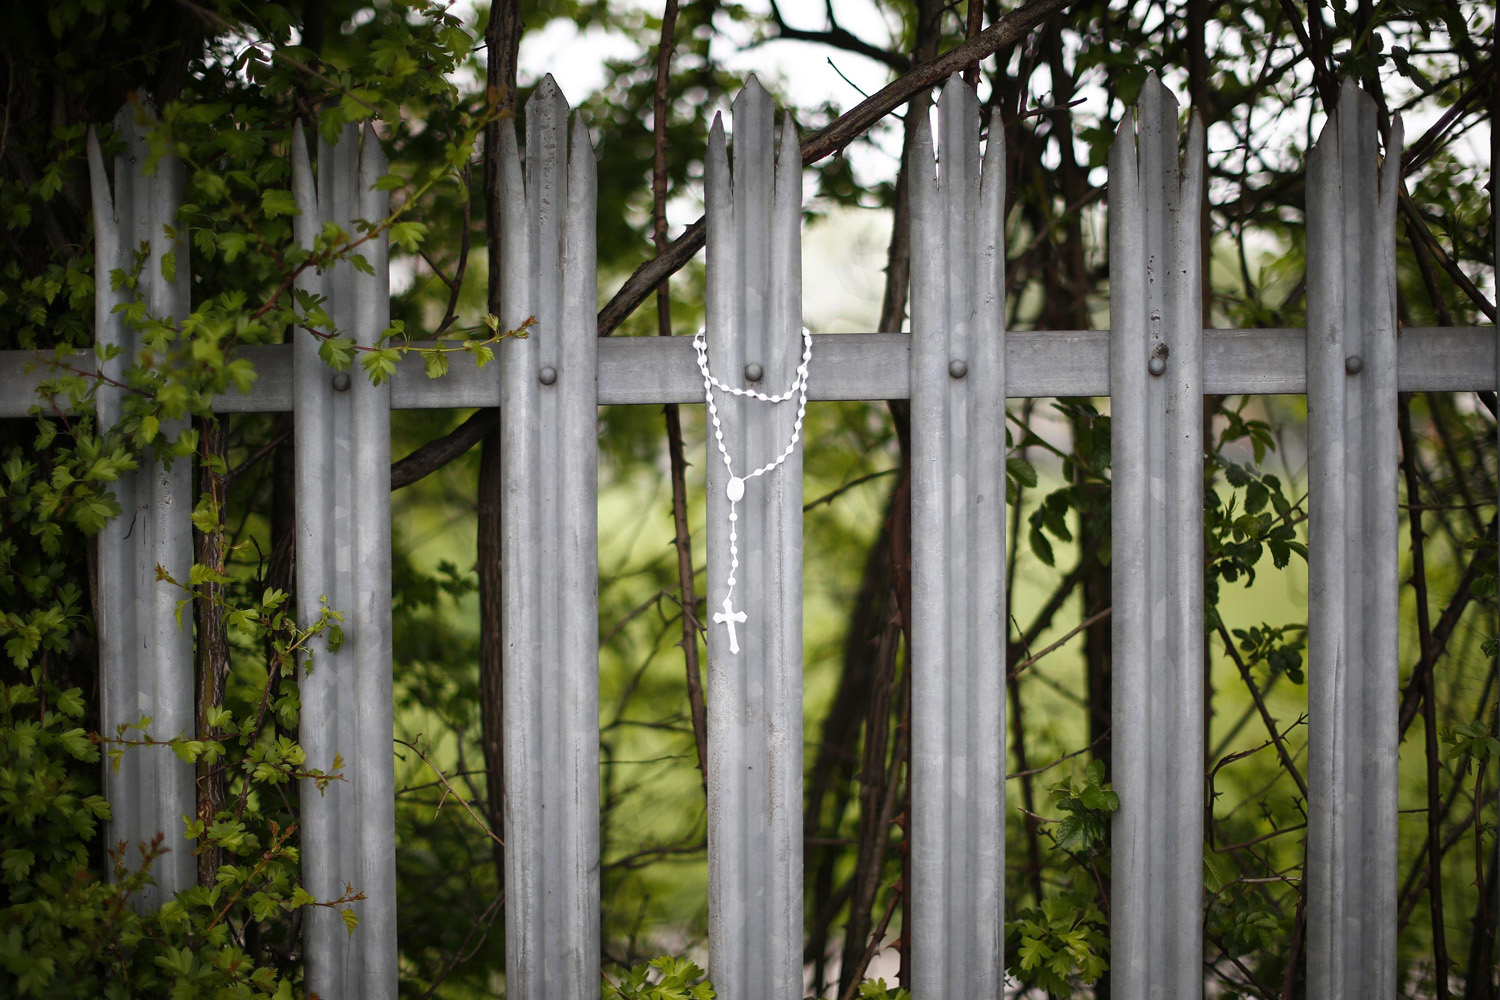 Apr. 29, 2014. A crucifix hangs from the fence of Corpus Christi Catholic College after teacher Anne Maguire was fatally stabbed in Leeds, northern England.